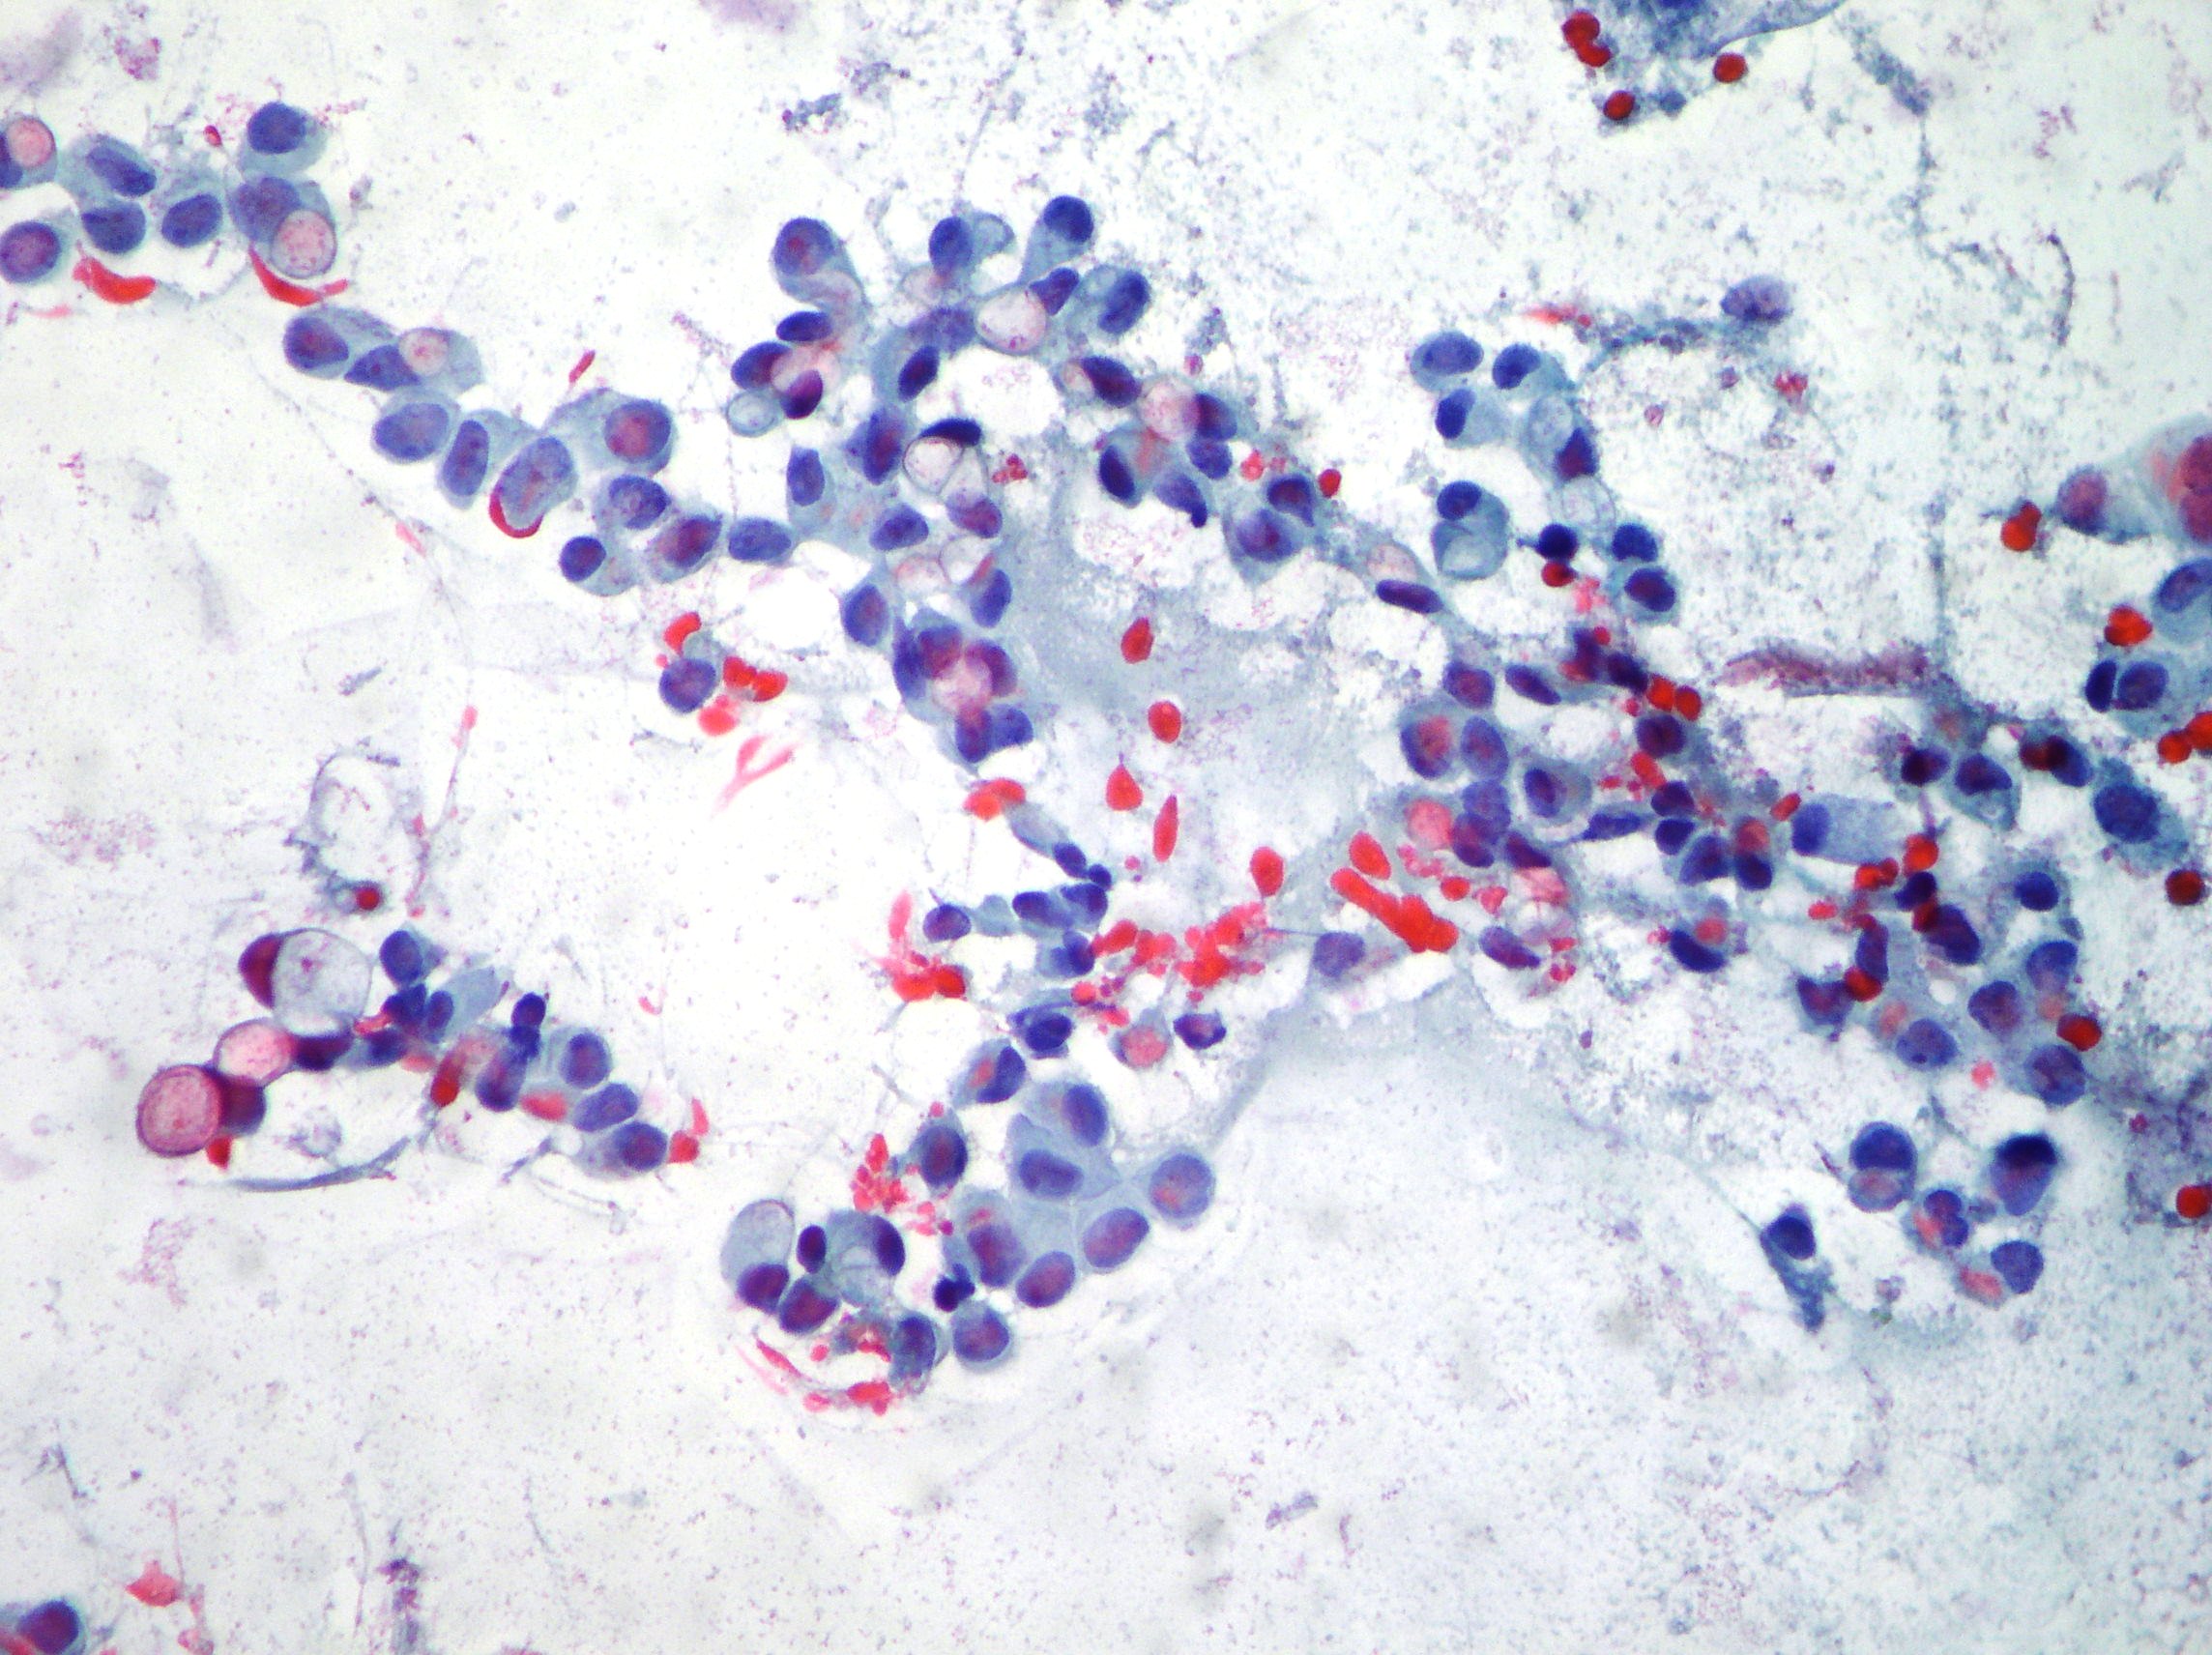 File:Fibrocystic changes of breast - cytology 1.jpg 